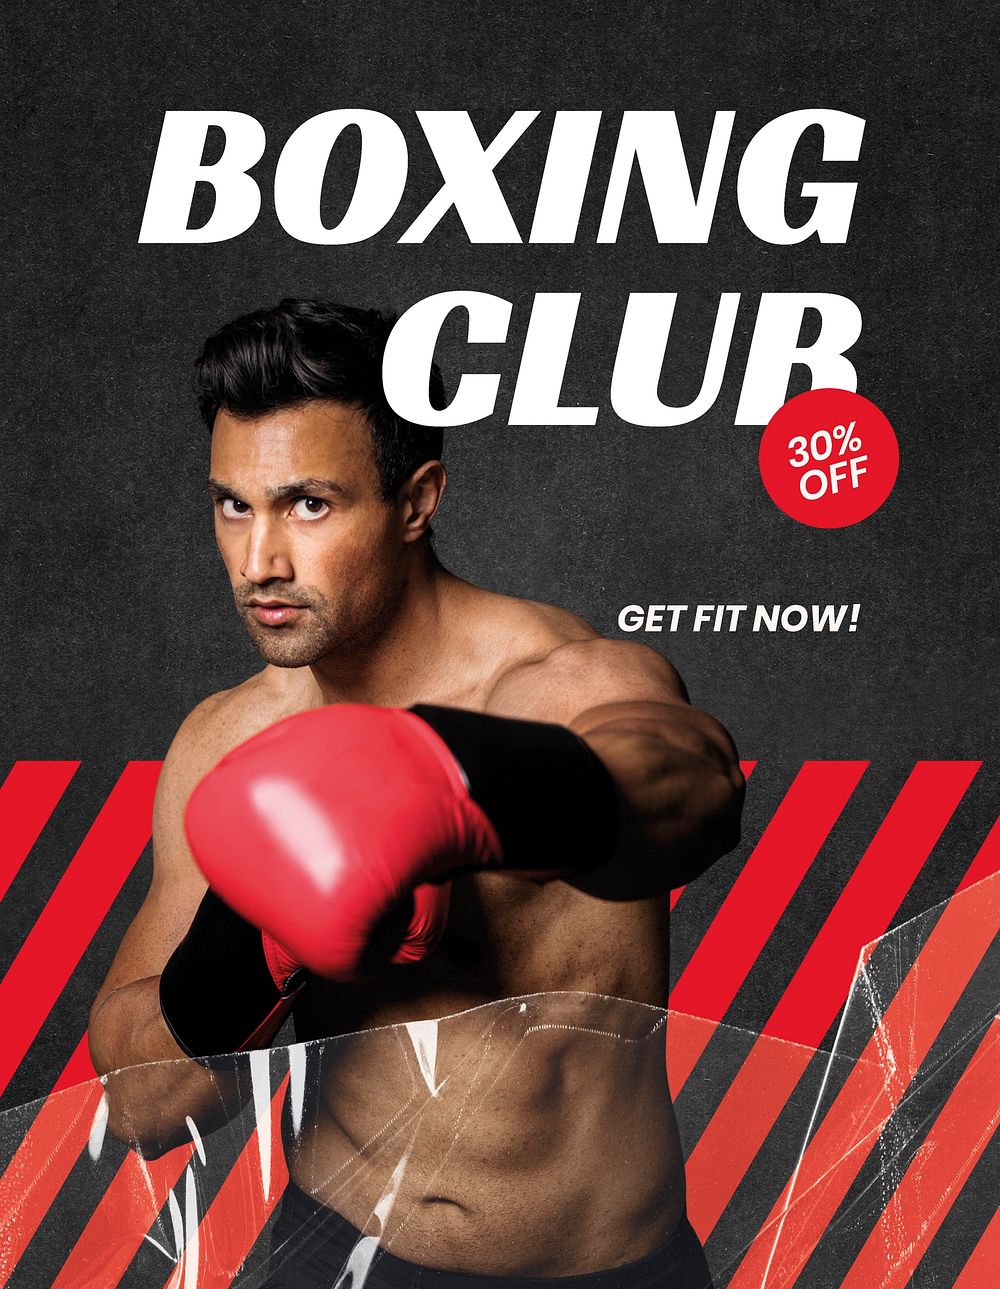 Boxing club flyer template, sports, gym advertisement vector